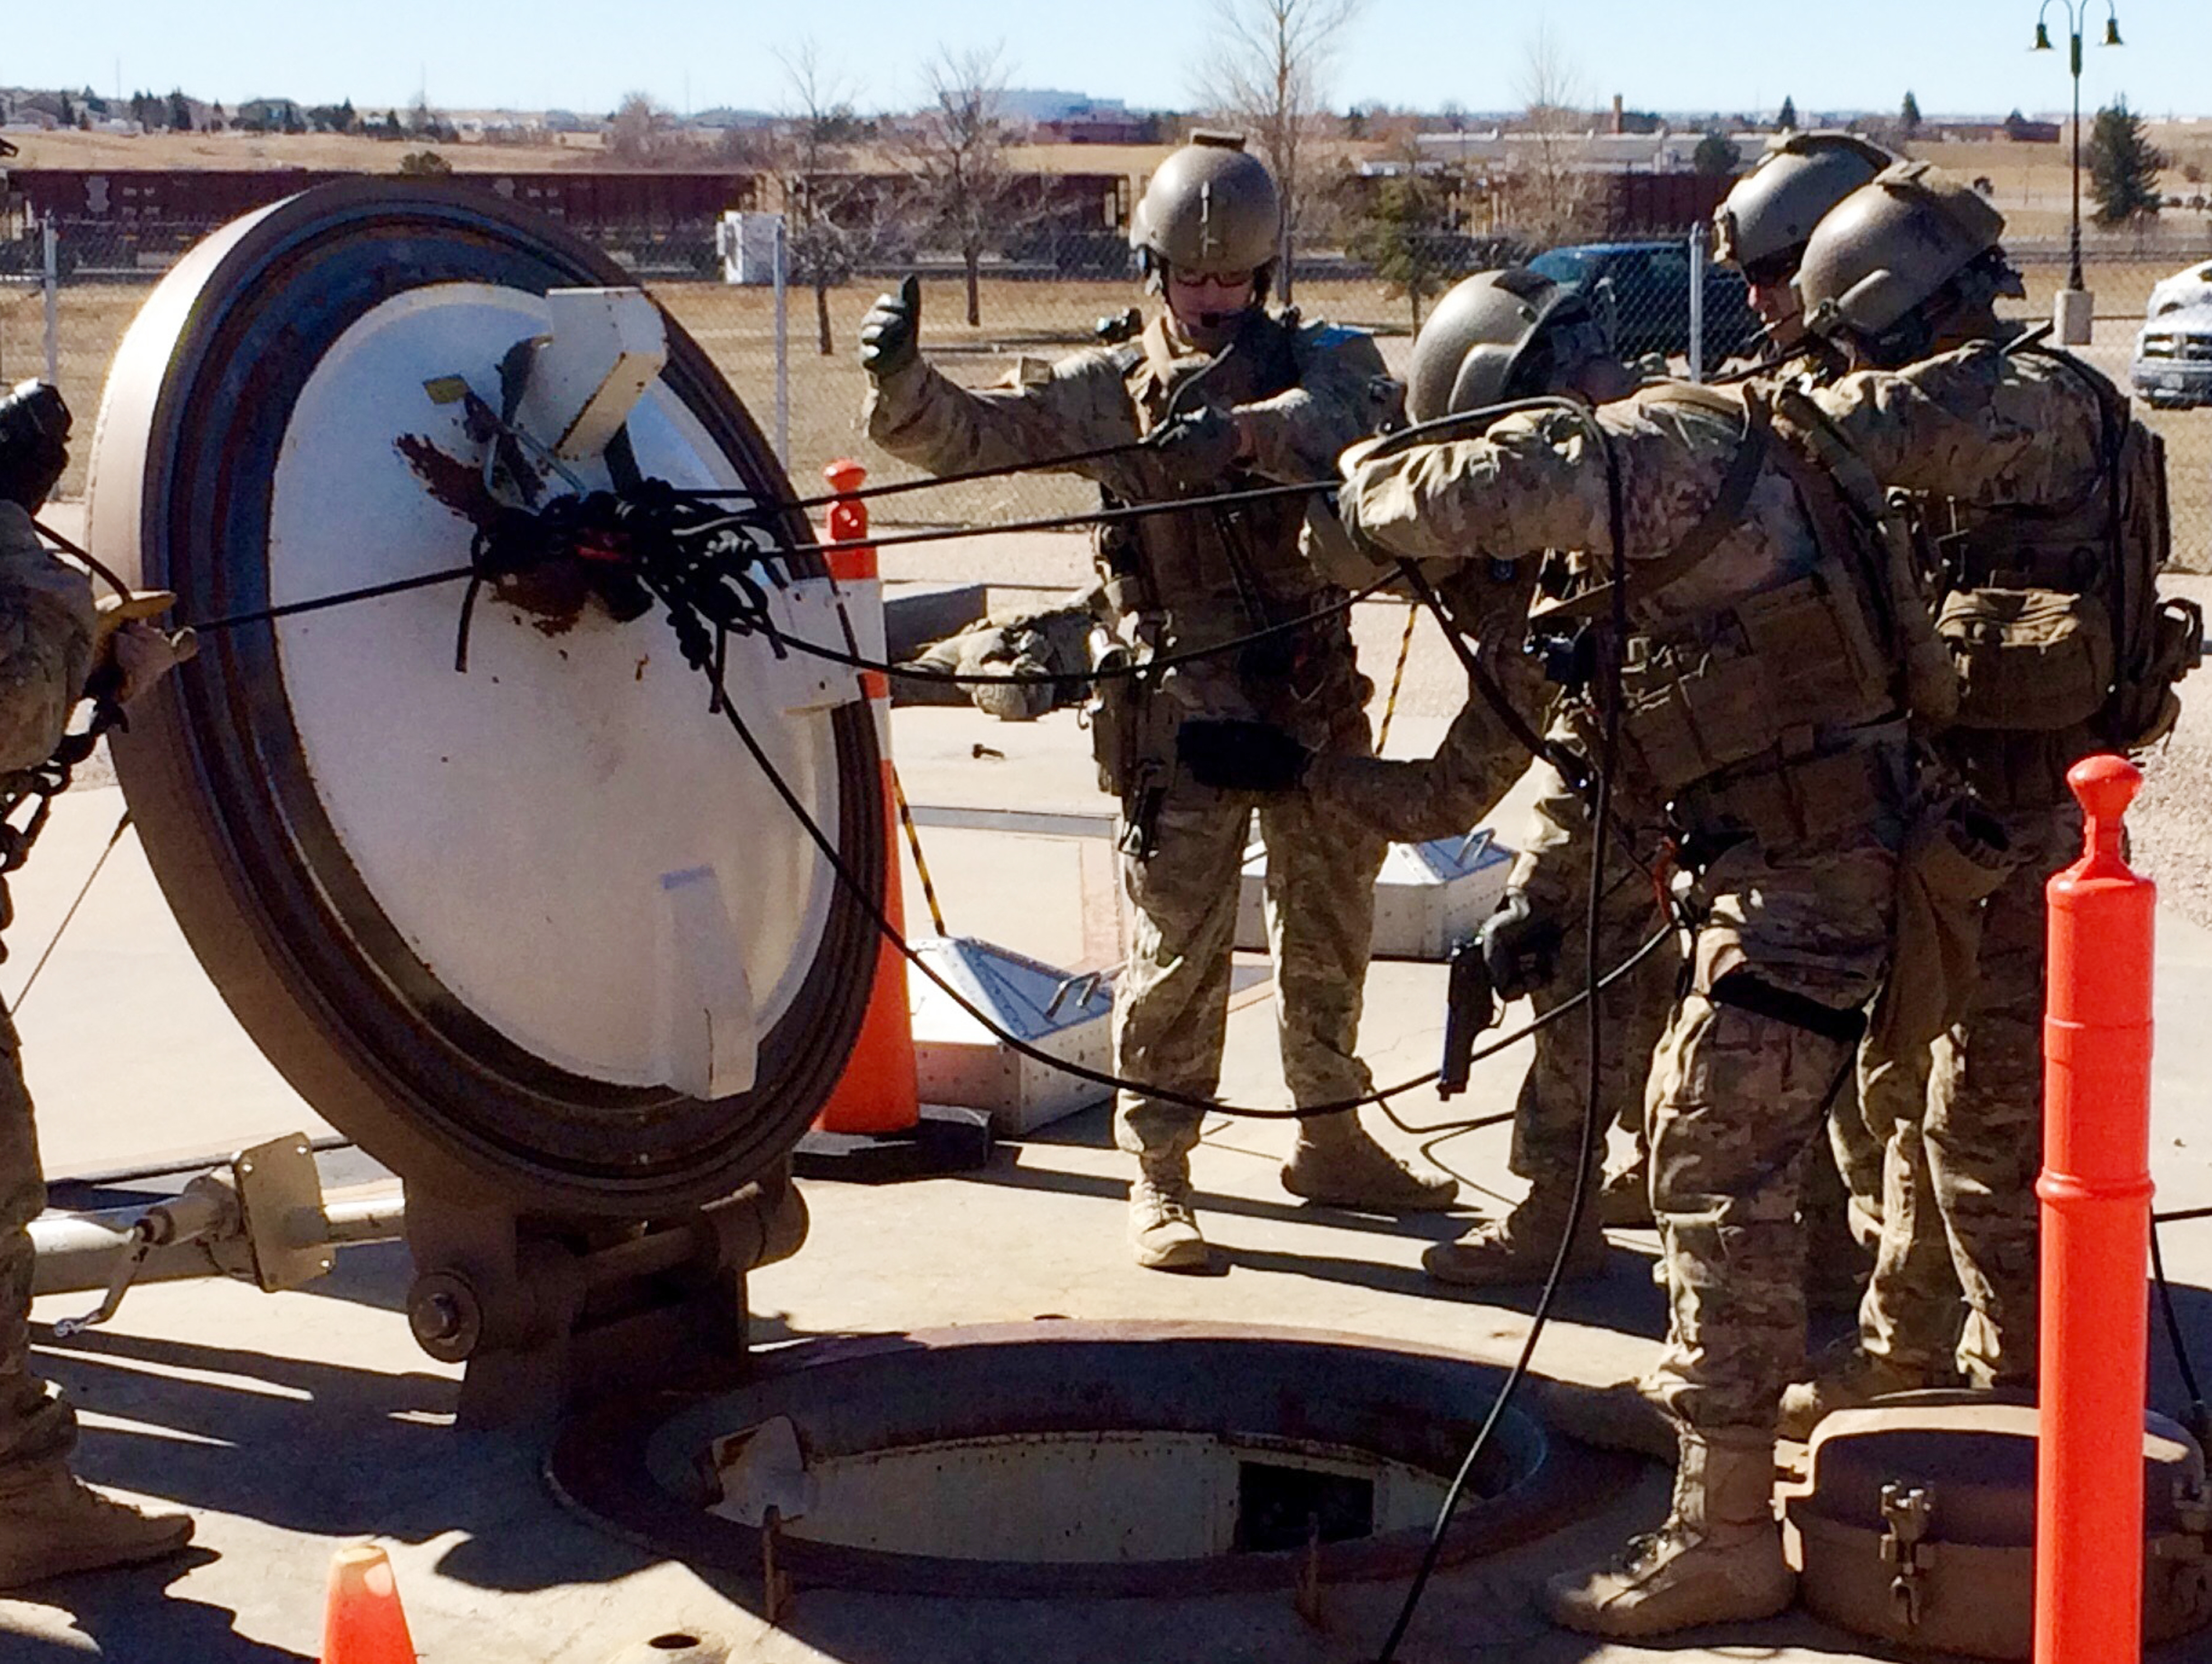 Members of the 790th Missile Security Forces Squadron demonstrate their training for recapturing a Minuteman missile silo after being taken over by an intruder/attacker (Robert Burns/AP)